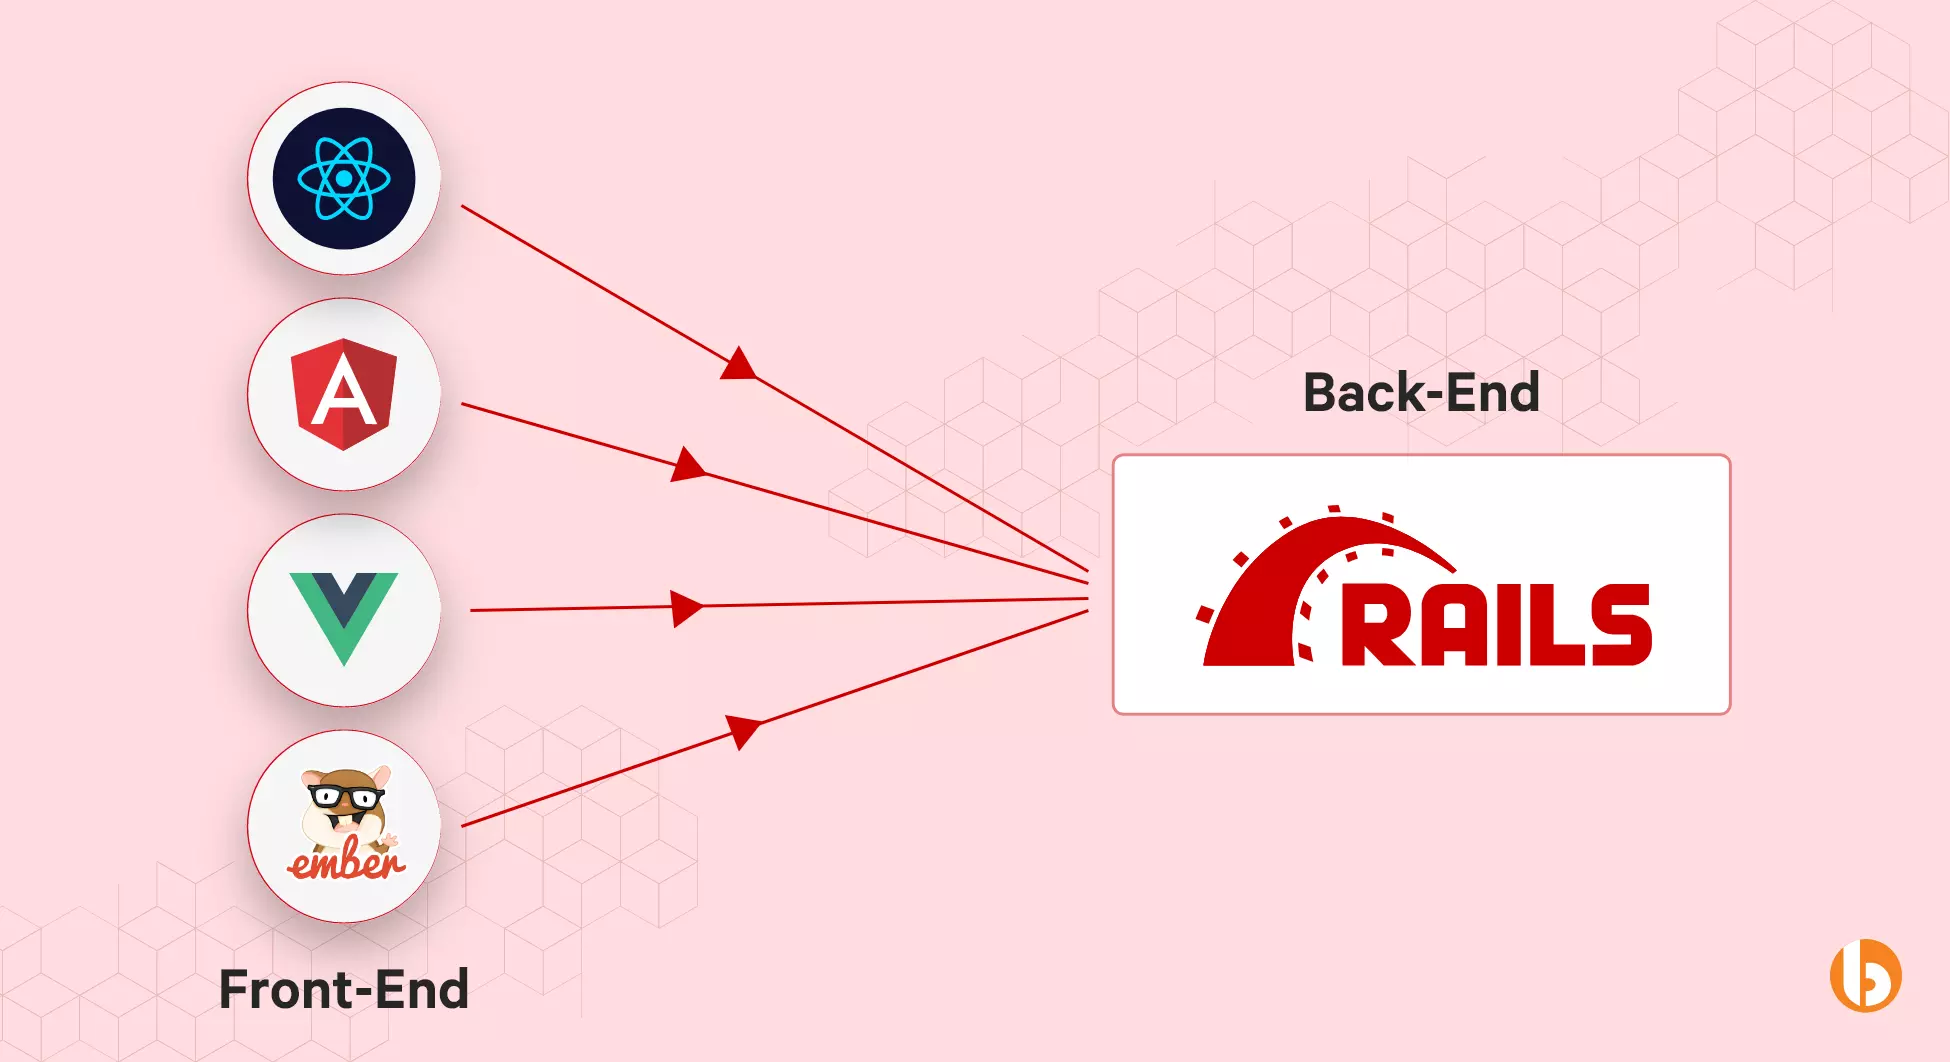 Frontend platform with ruby on rails